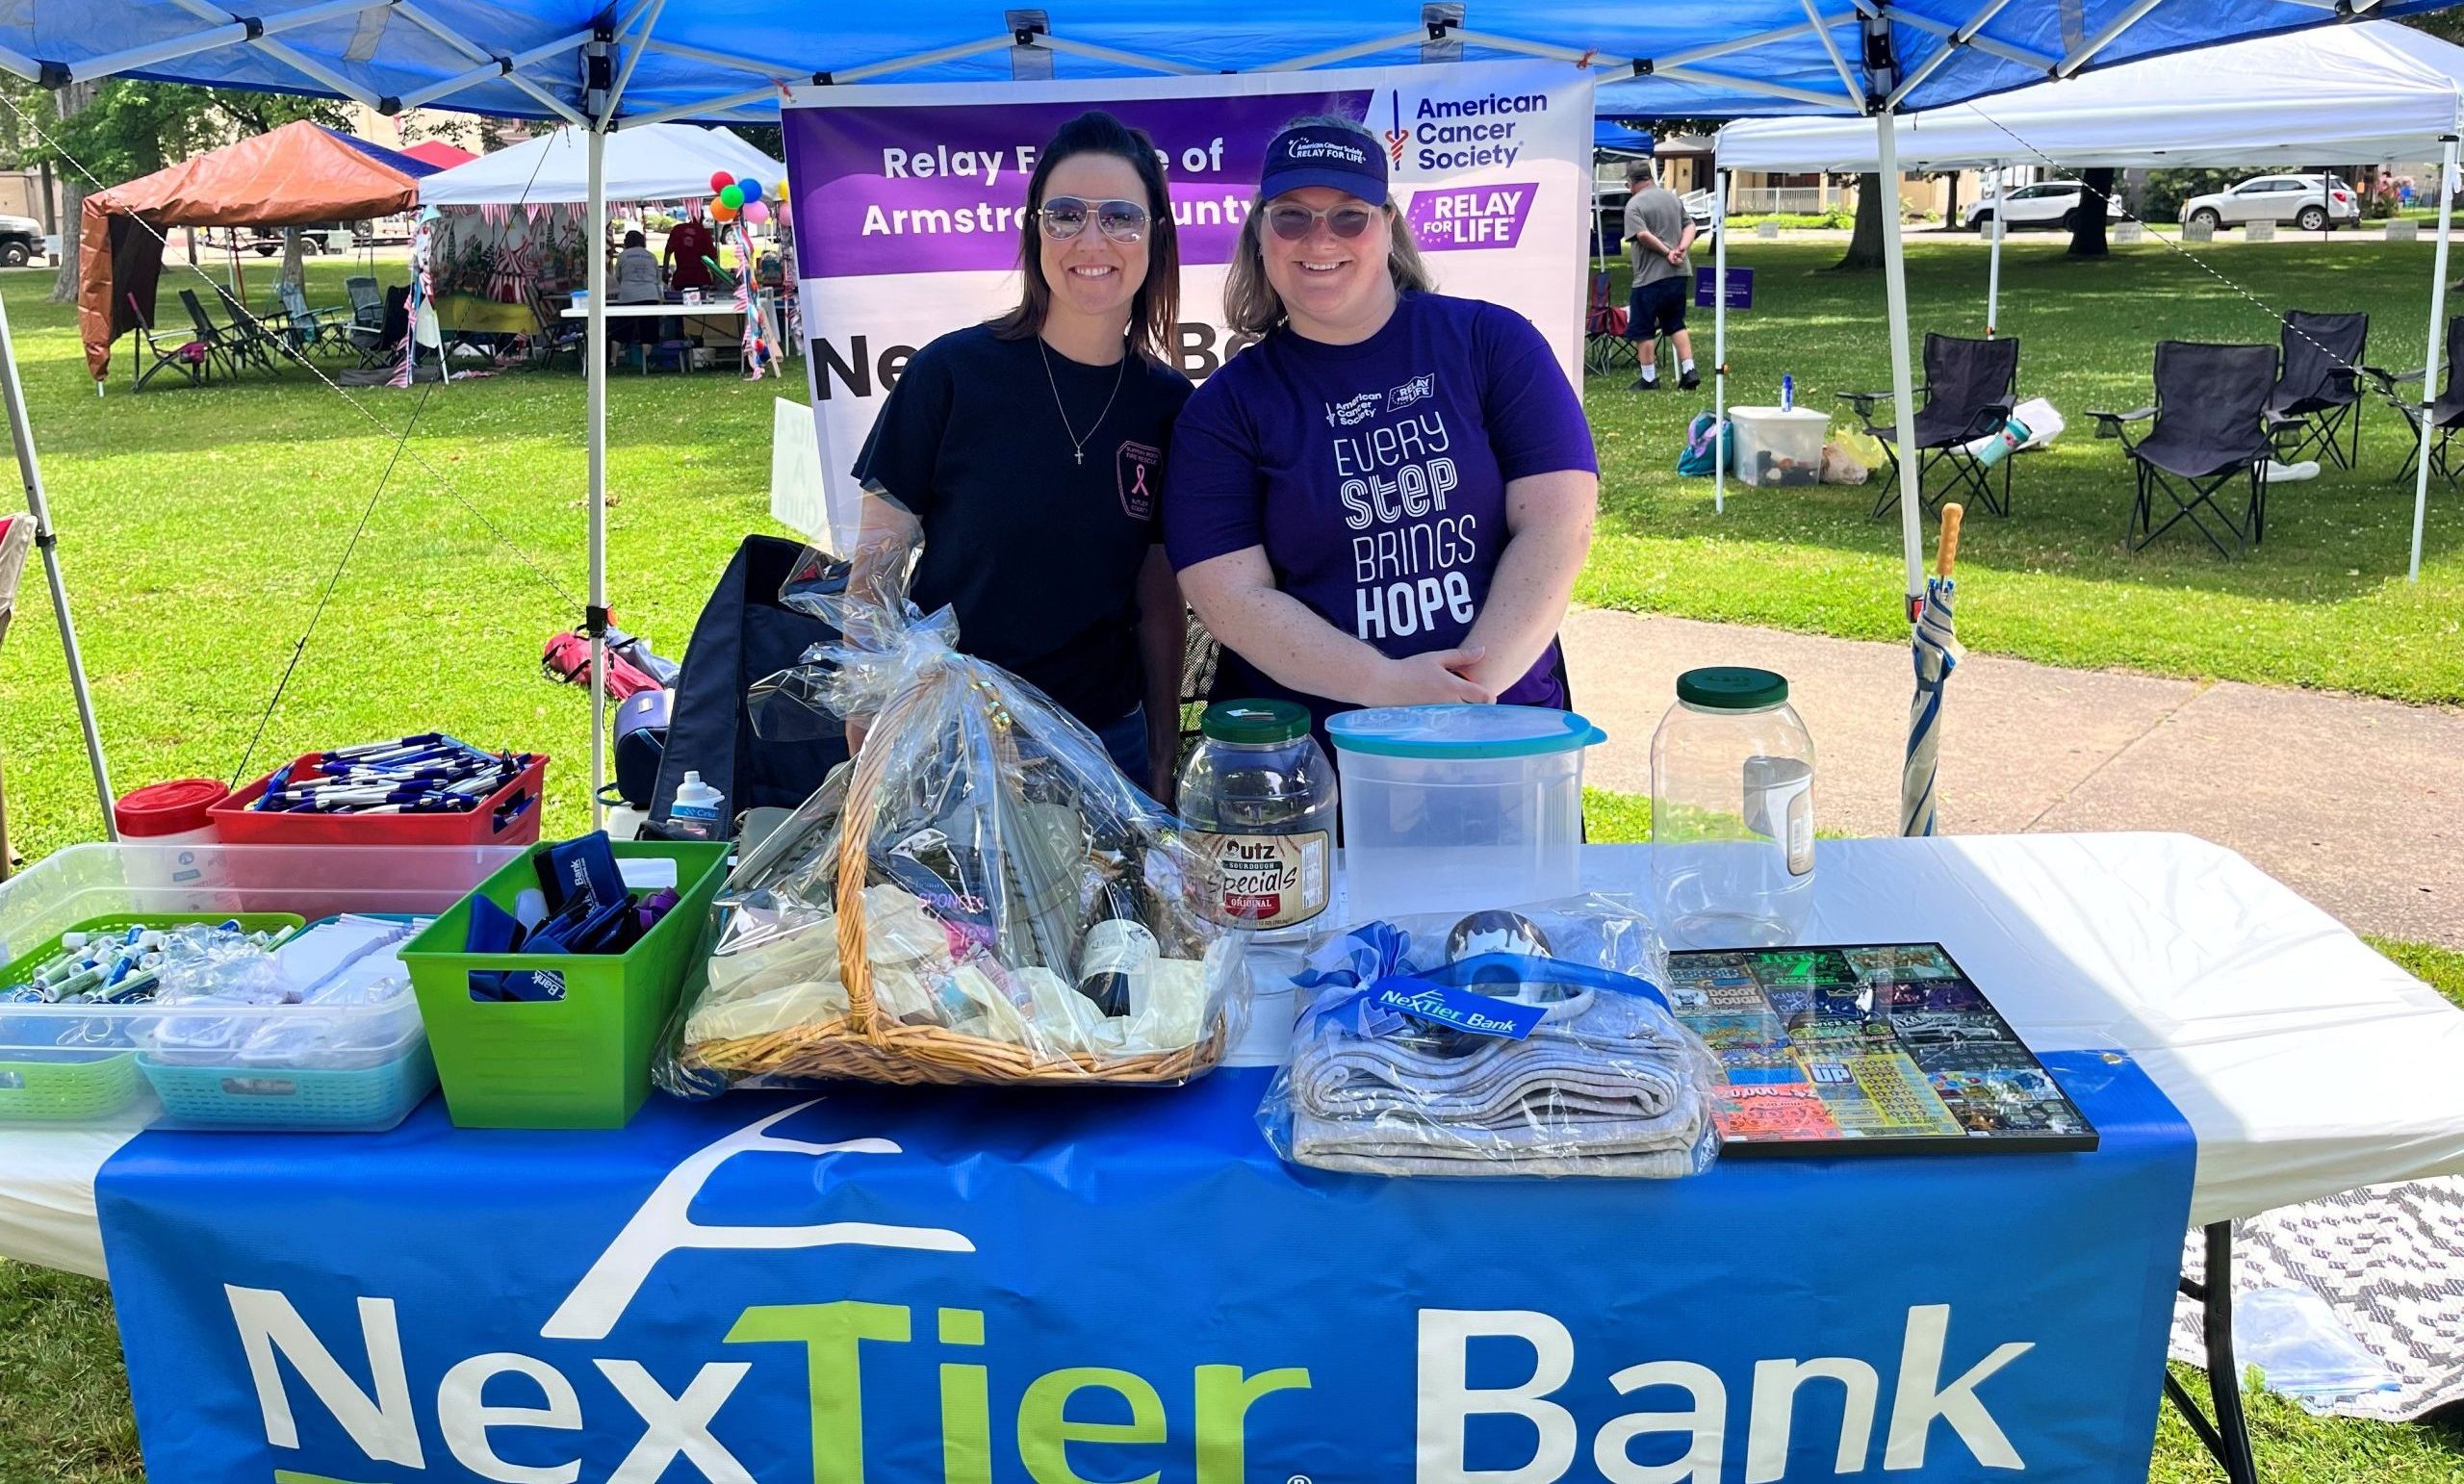 NexTier Bank team members at the Banking on a Cure Relay for Life team.